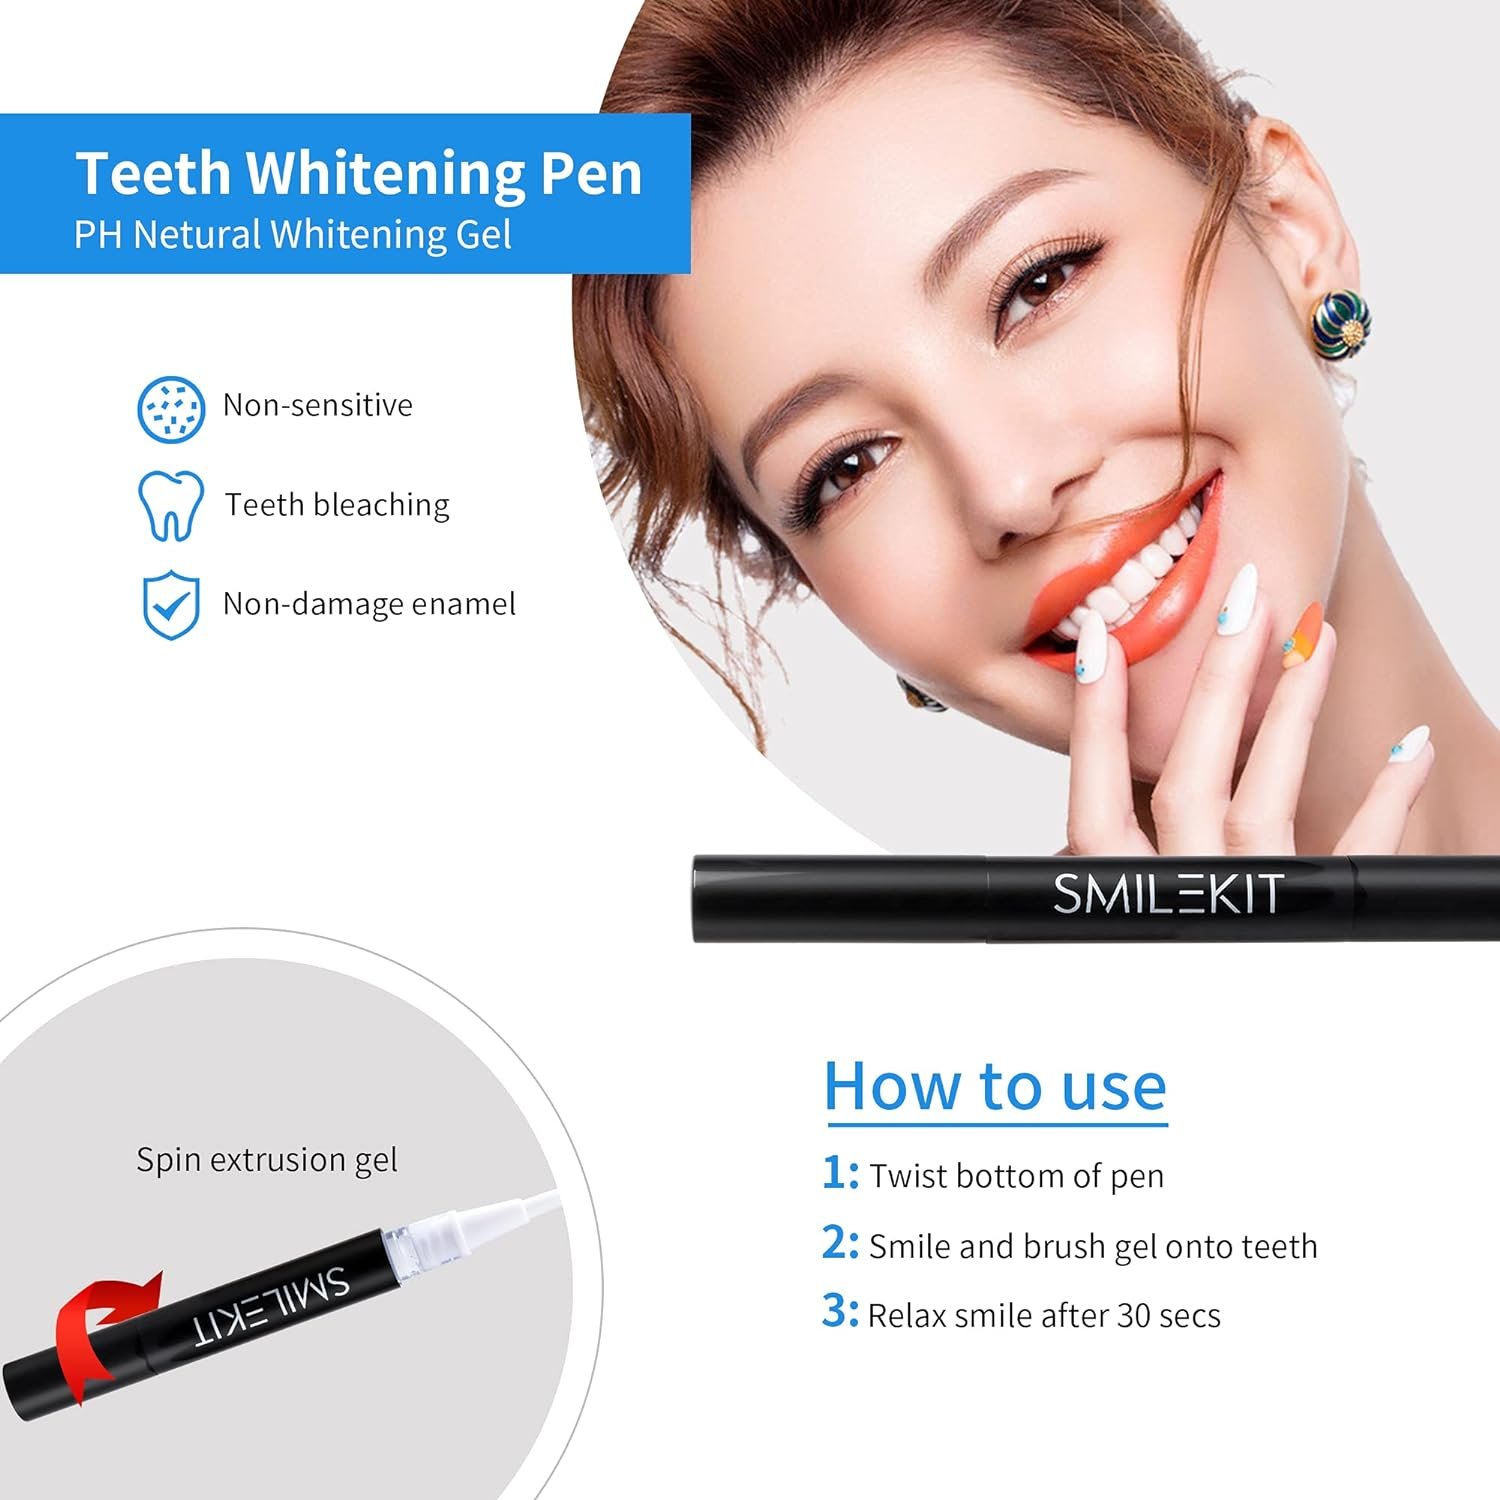 Afranti Home Use Wireless Teeth Whitening Kit with 16-Point LED Blue Lights Accelerator, Natural Whitening Effective Stain Removal Include 4 Teeth Whitening Gel Pens Complimentary Color Card